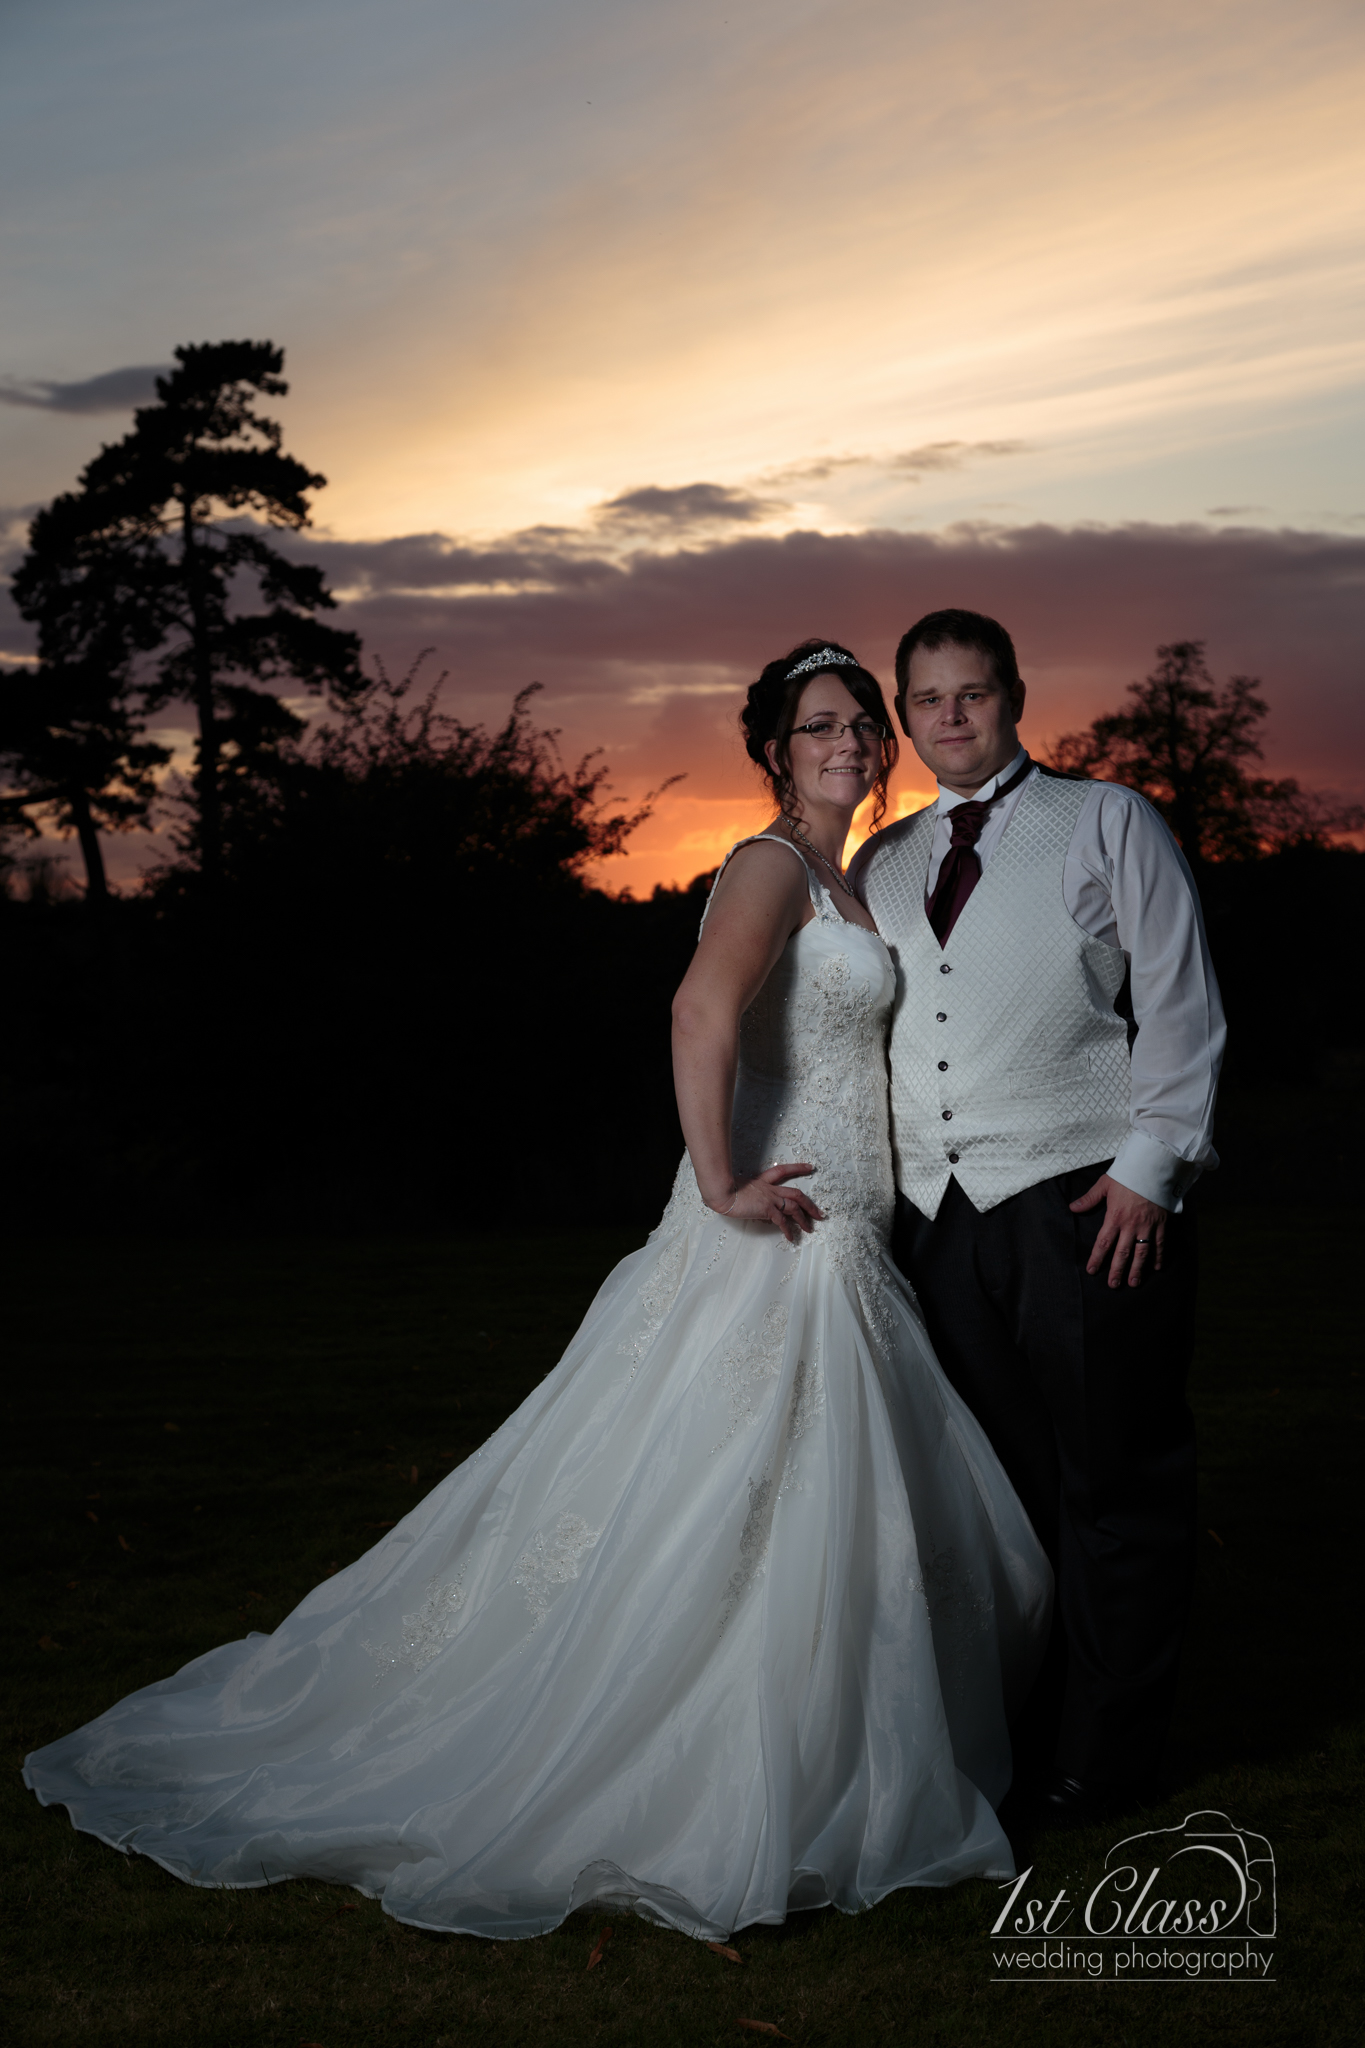 Charlotte & Colin's Wedding at Barton Hall Hotel in Kettering